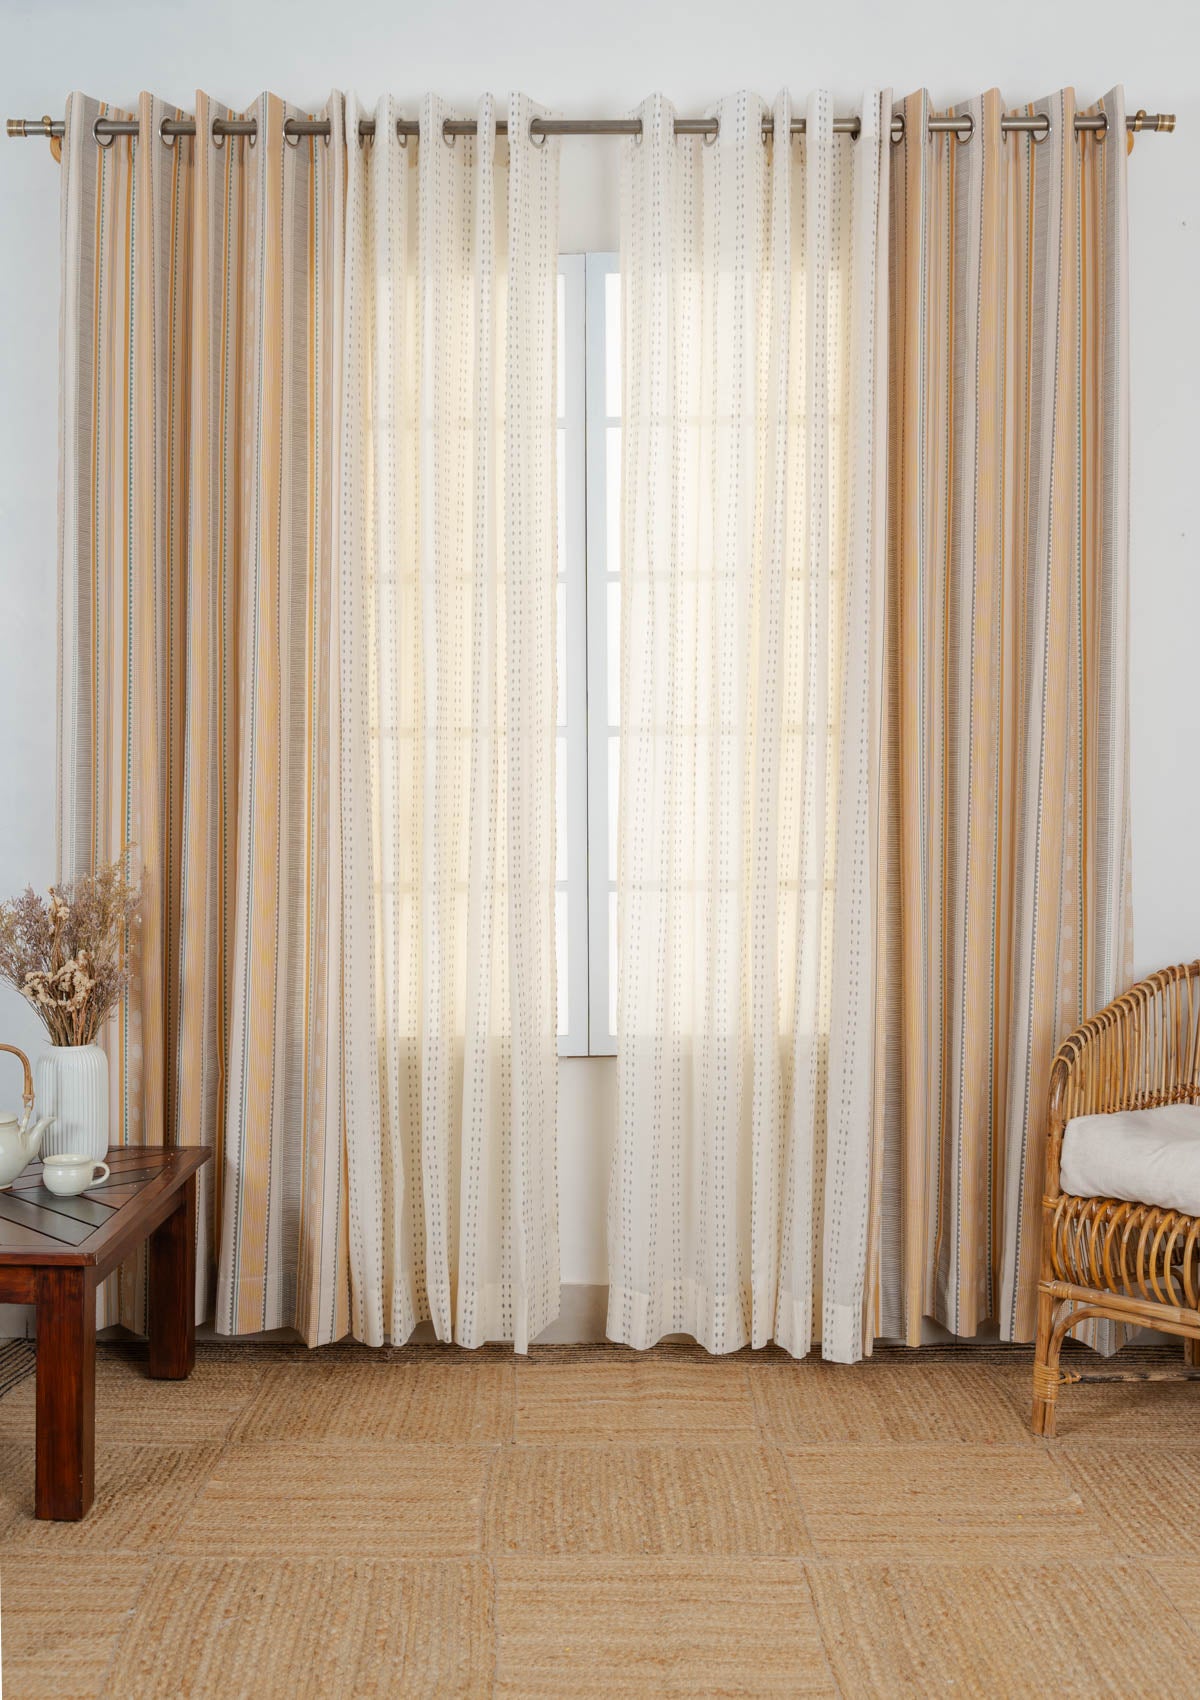 Buru geometric cotton with Dew geometric sheer 100% cotton curtains for living room - Set of 4